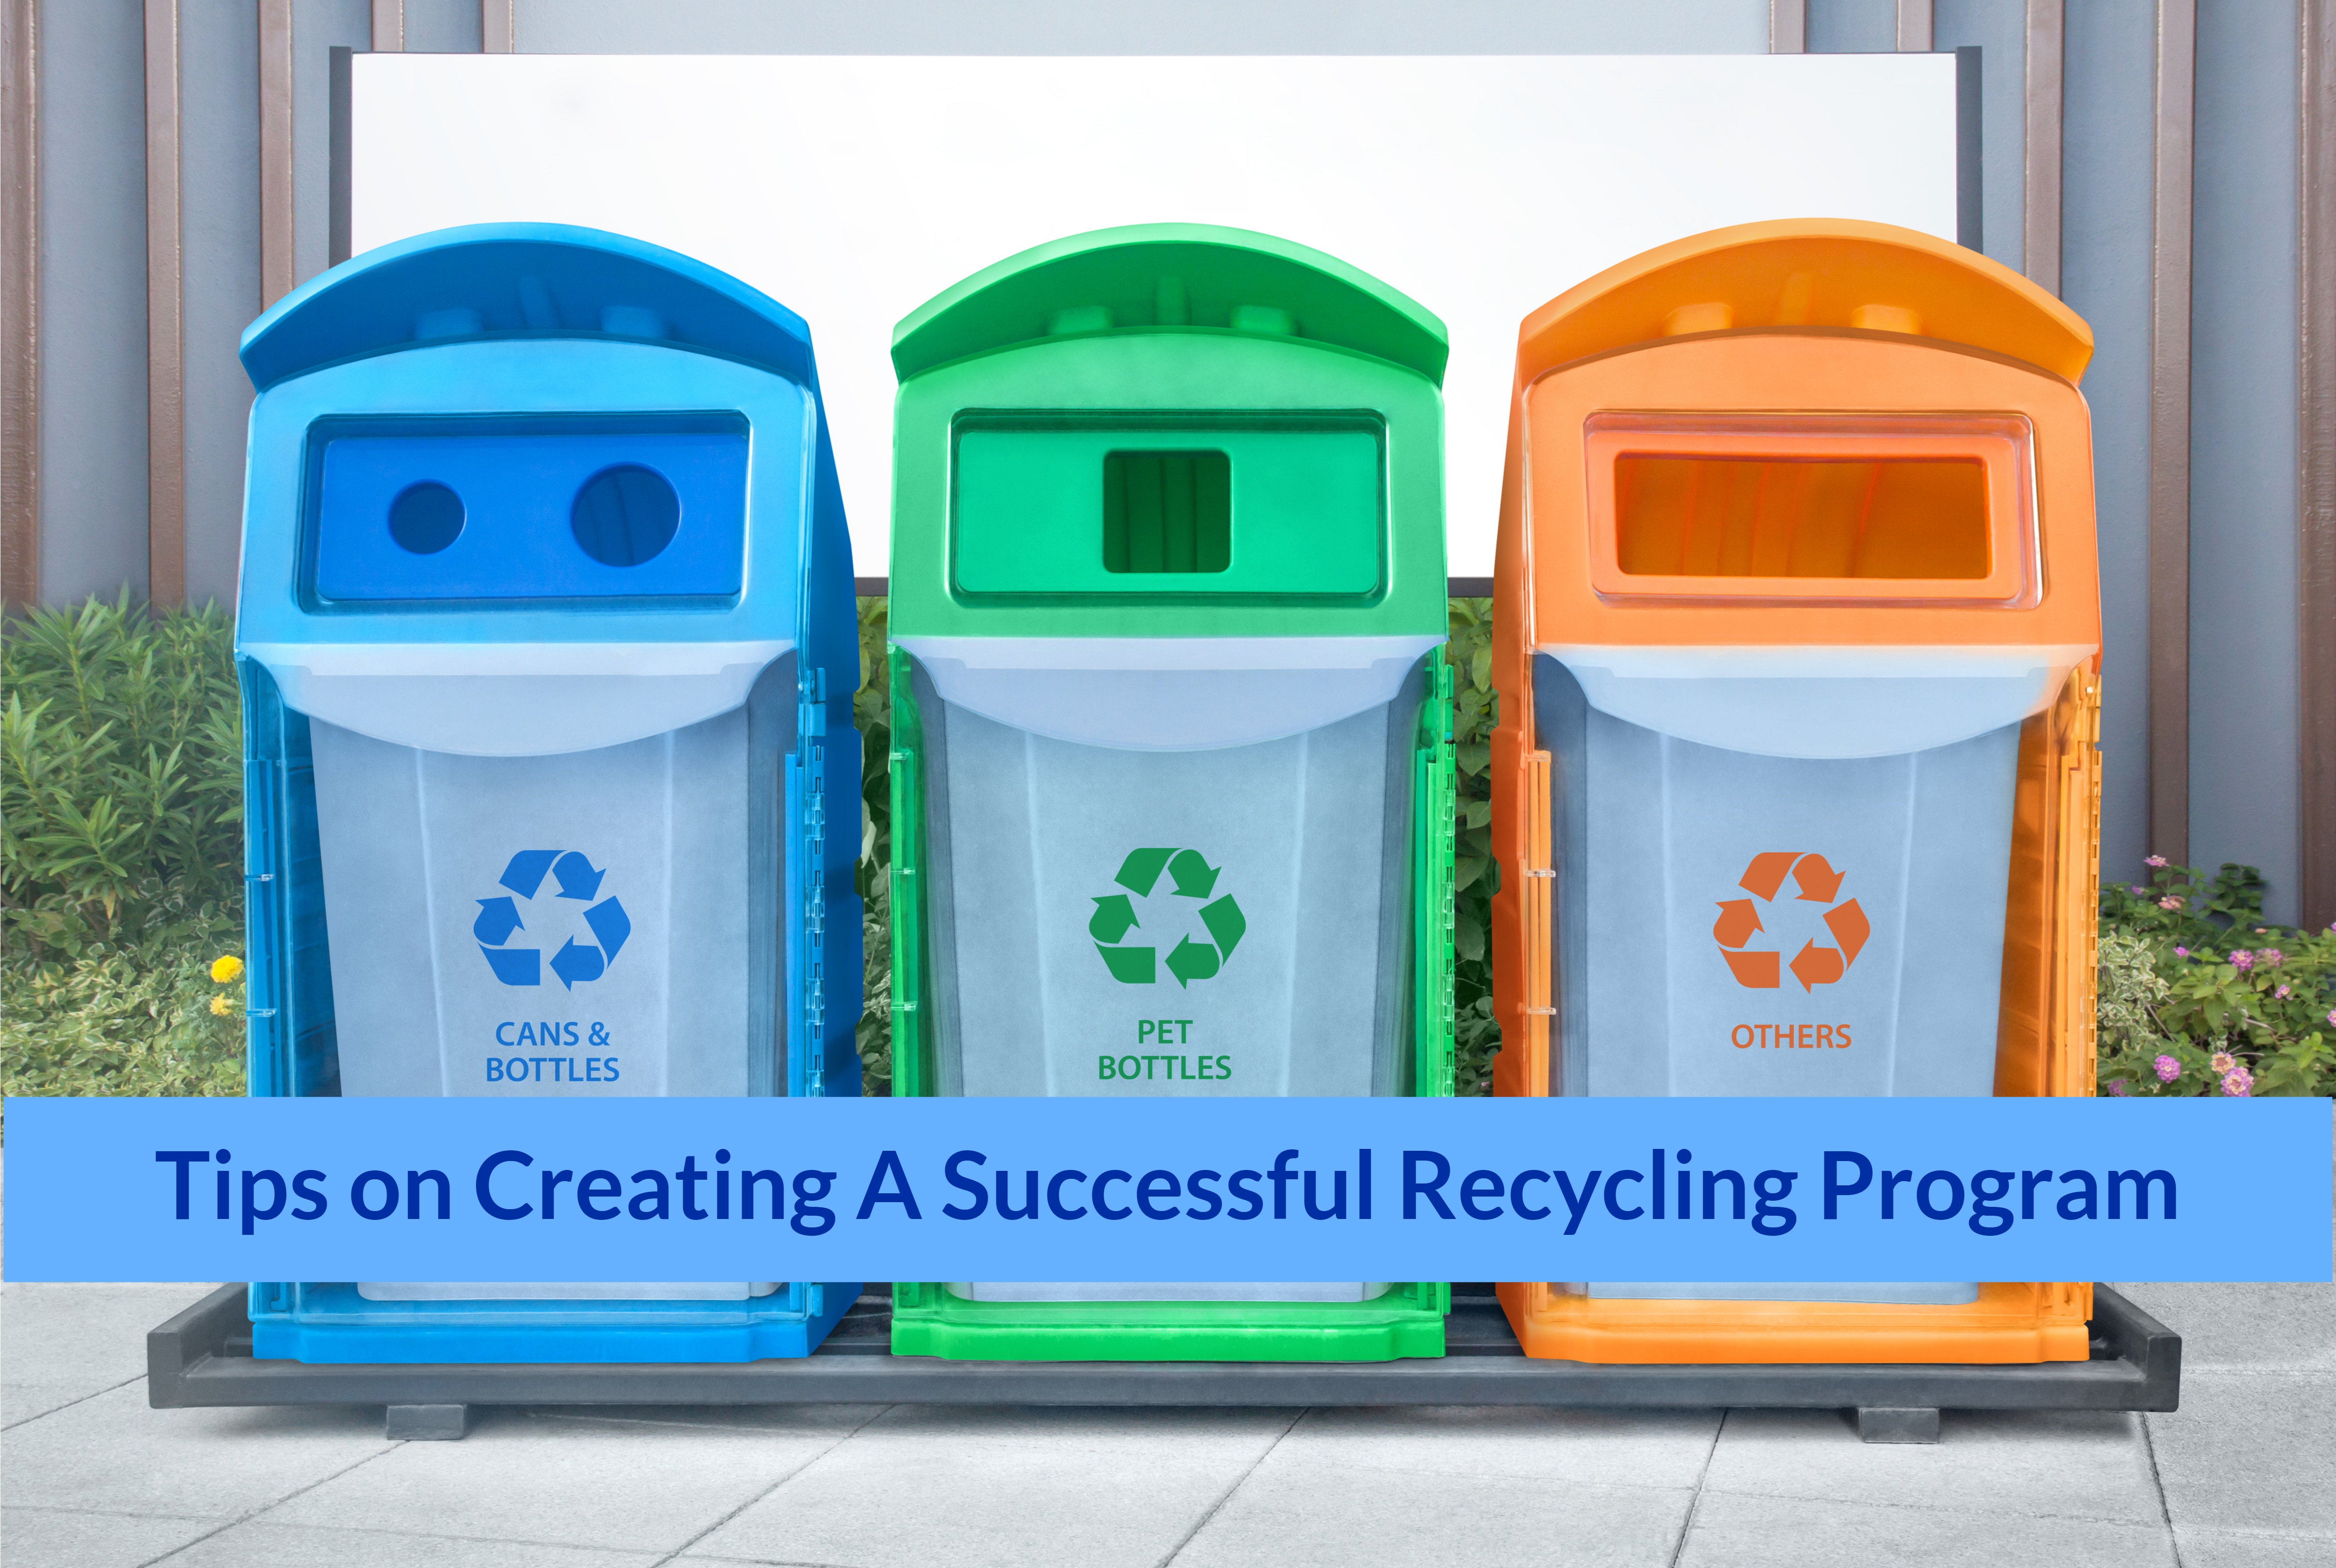 Tips on Creating a Successful Recycling Program